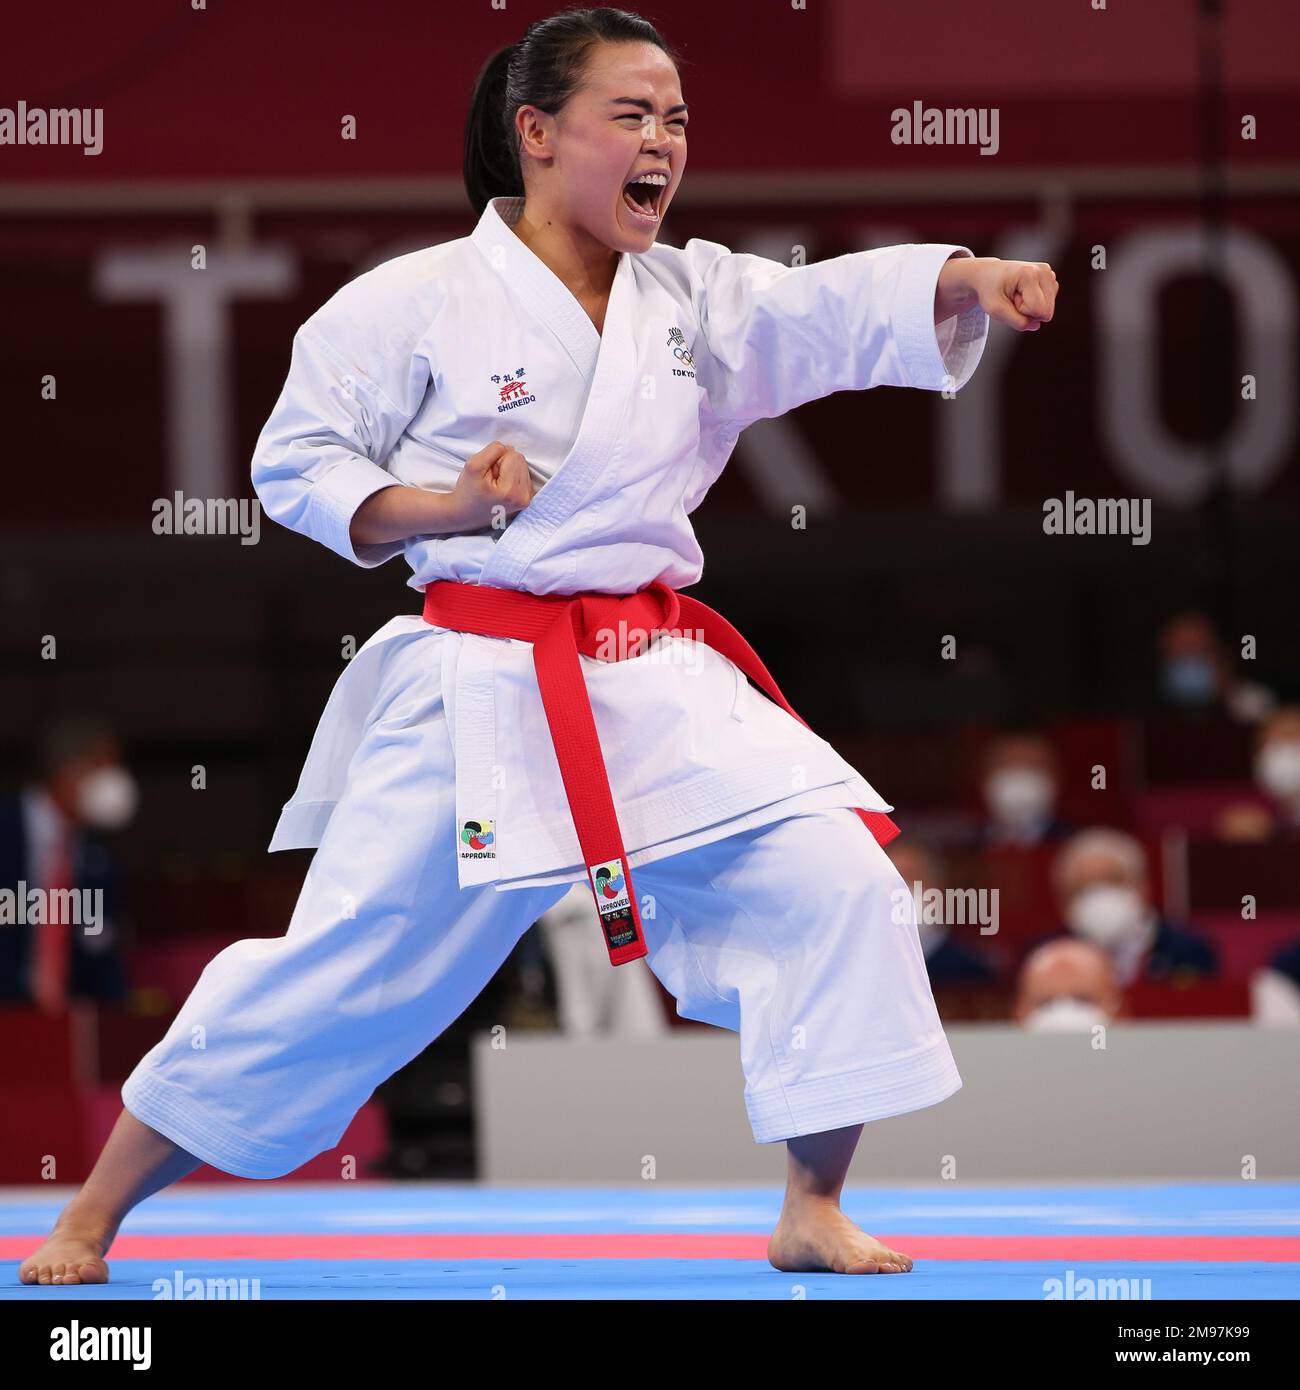 AUG 5, 2021 - TOKYO, JAPAN: Andrea ANACAN of New Zealand competes in the Women's Kata Elimination Round at the Tokyo 2020 Olympic Games (Photo by Mickael Chavet/RX) Stock Photo